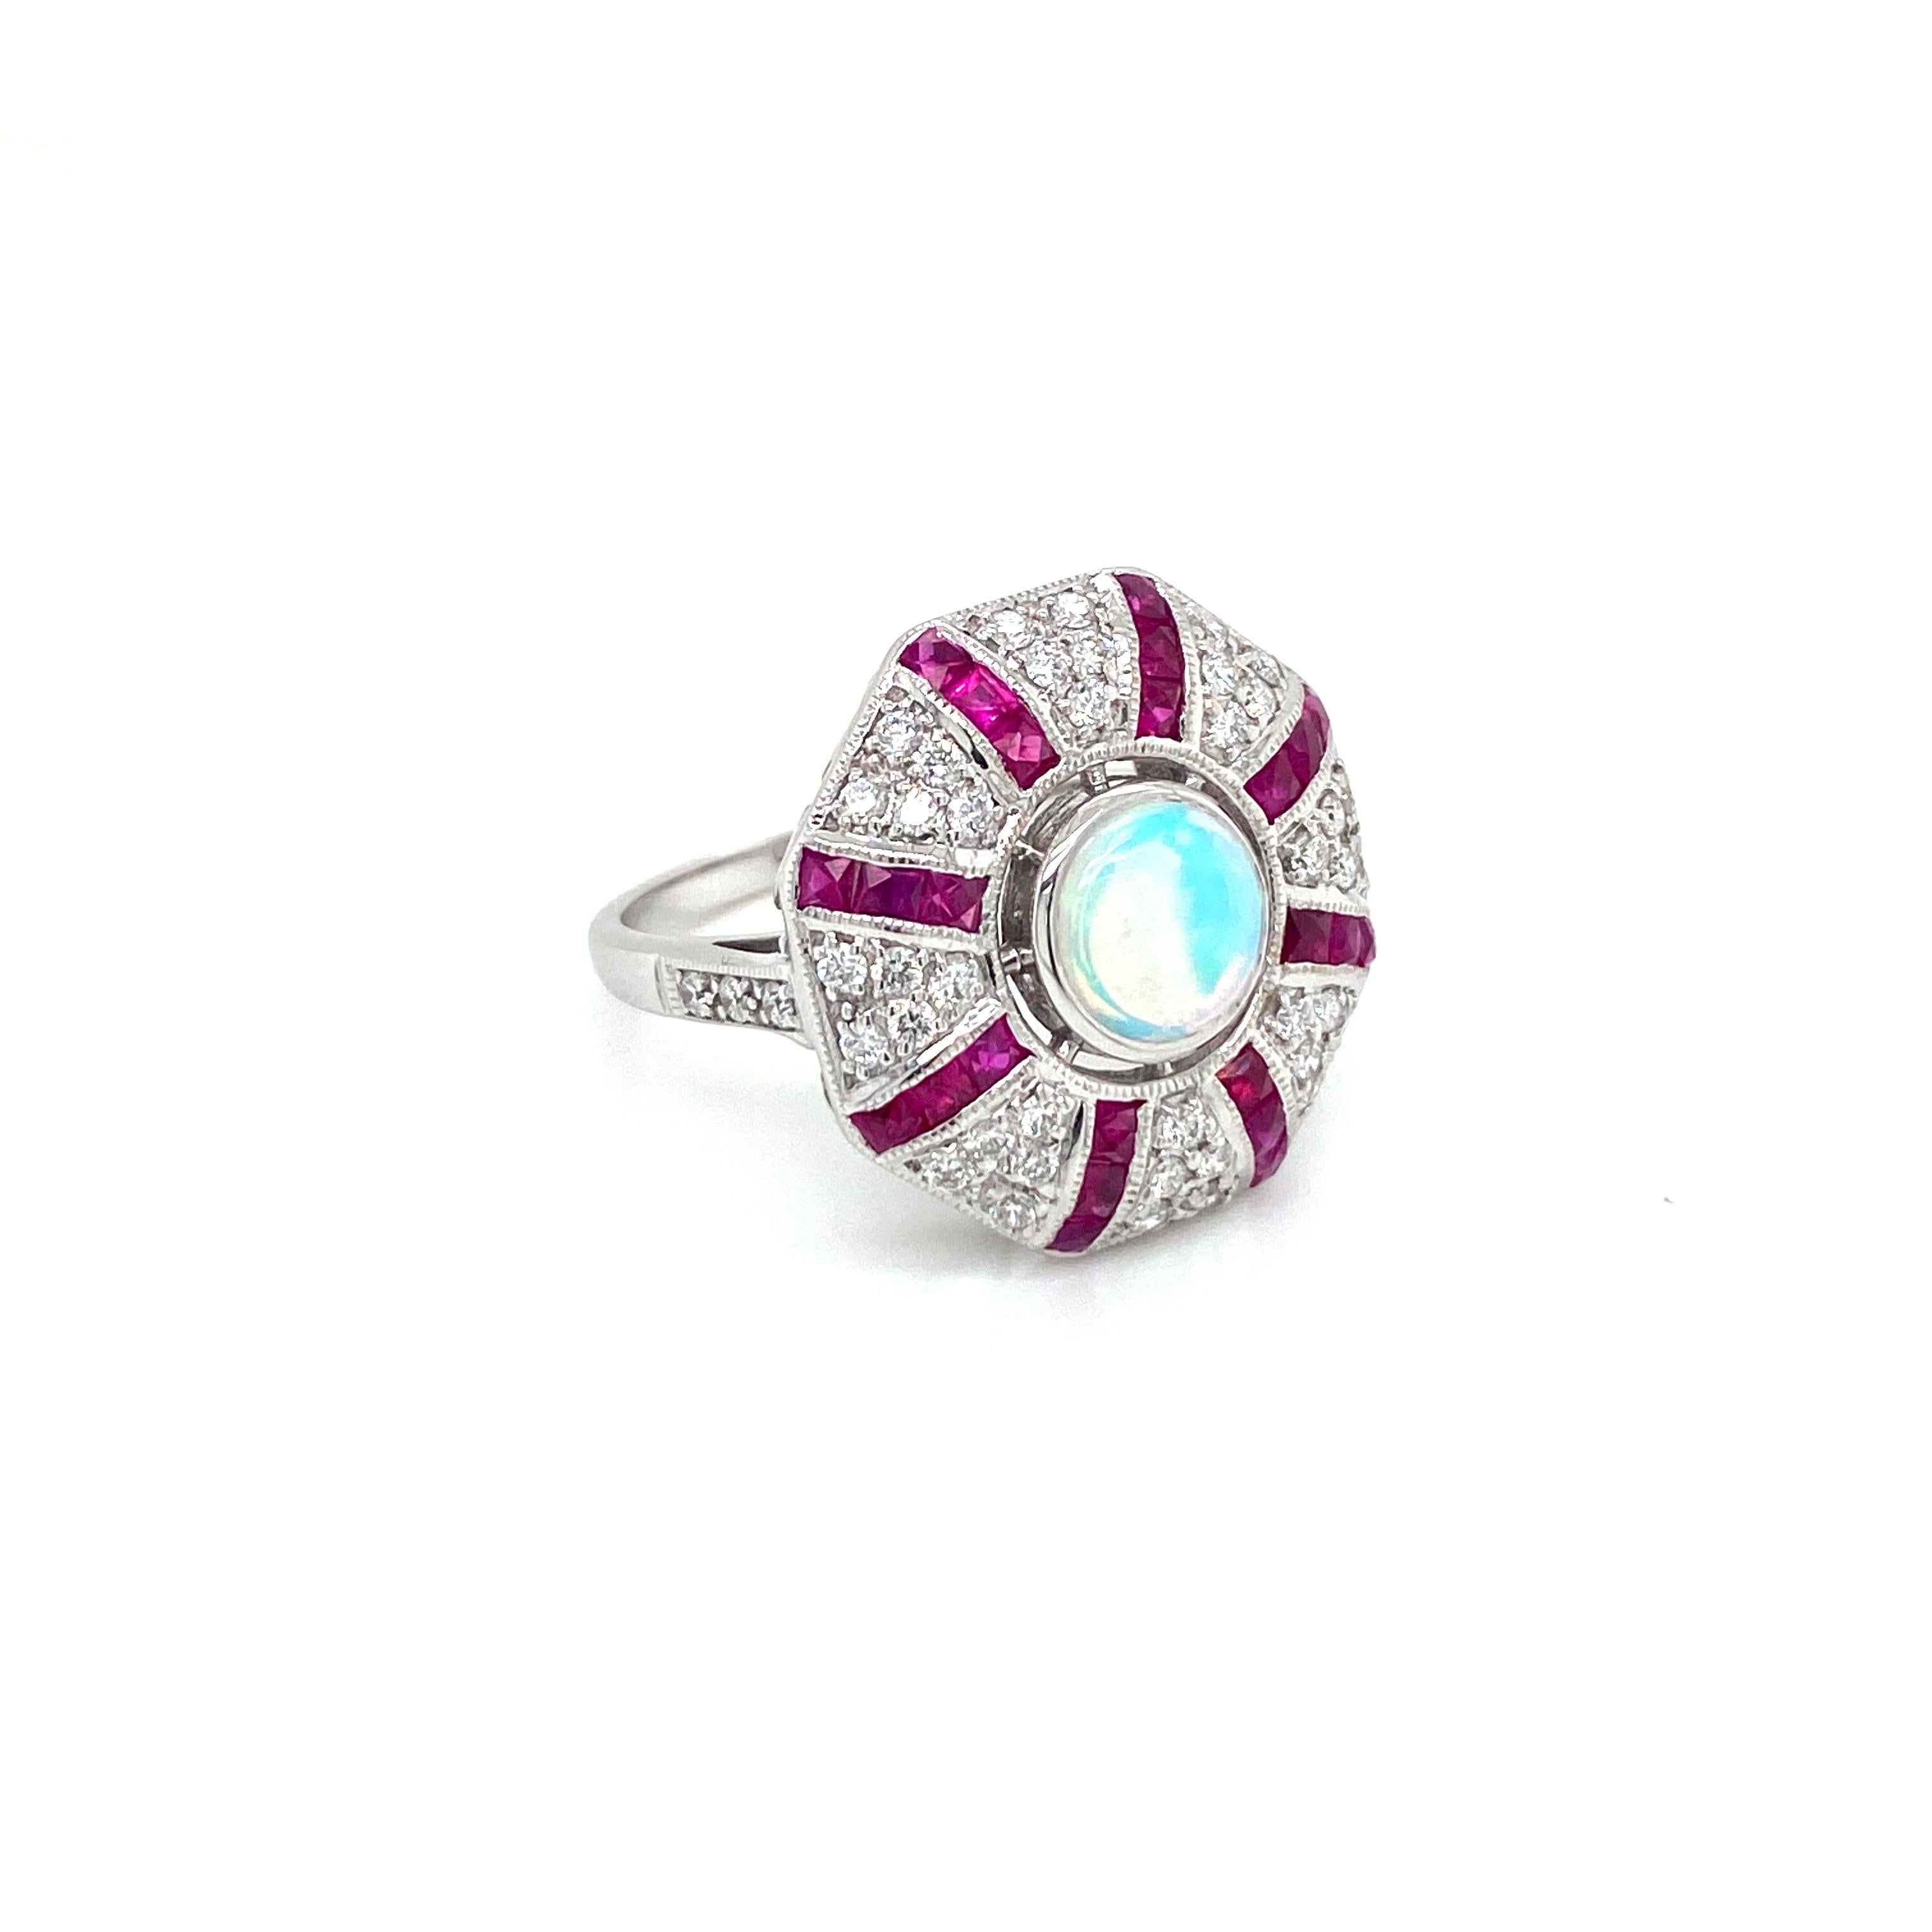 Mixed Cut Art Deco Style Opal Diamond Ruby Cocktail Ring Estate Fine Jewelry